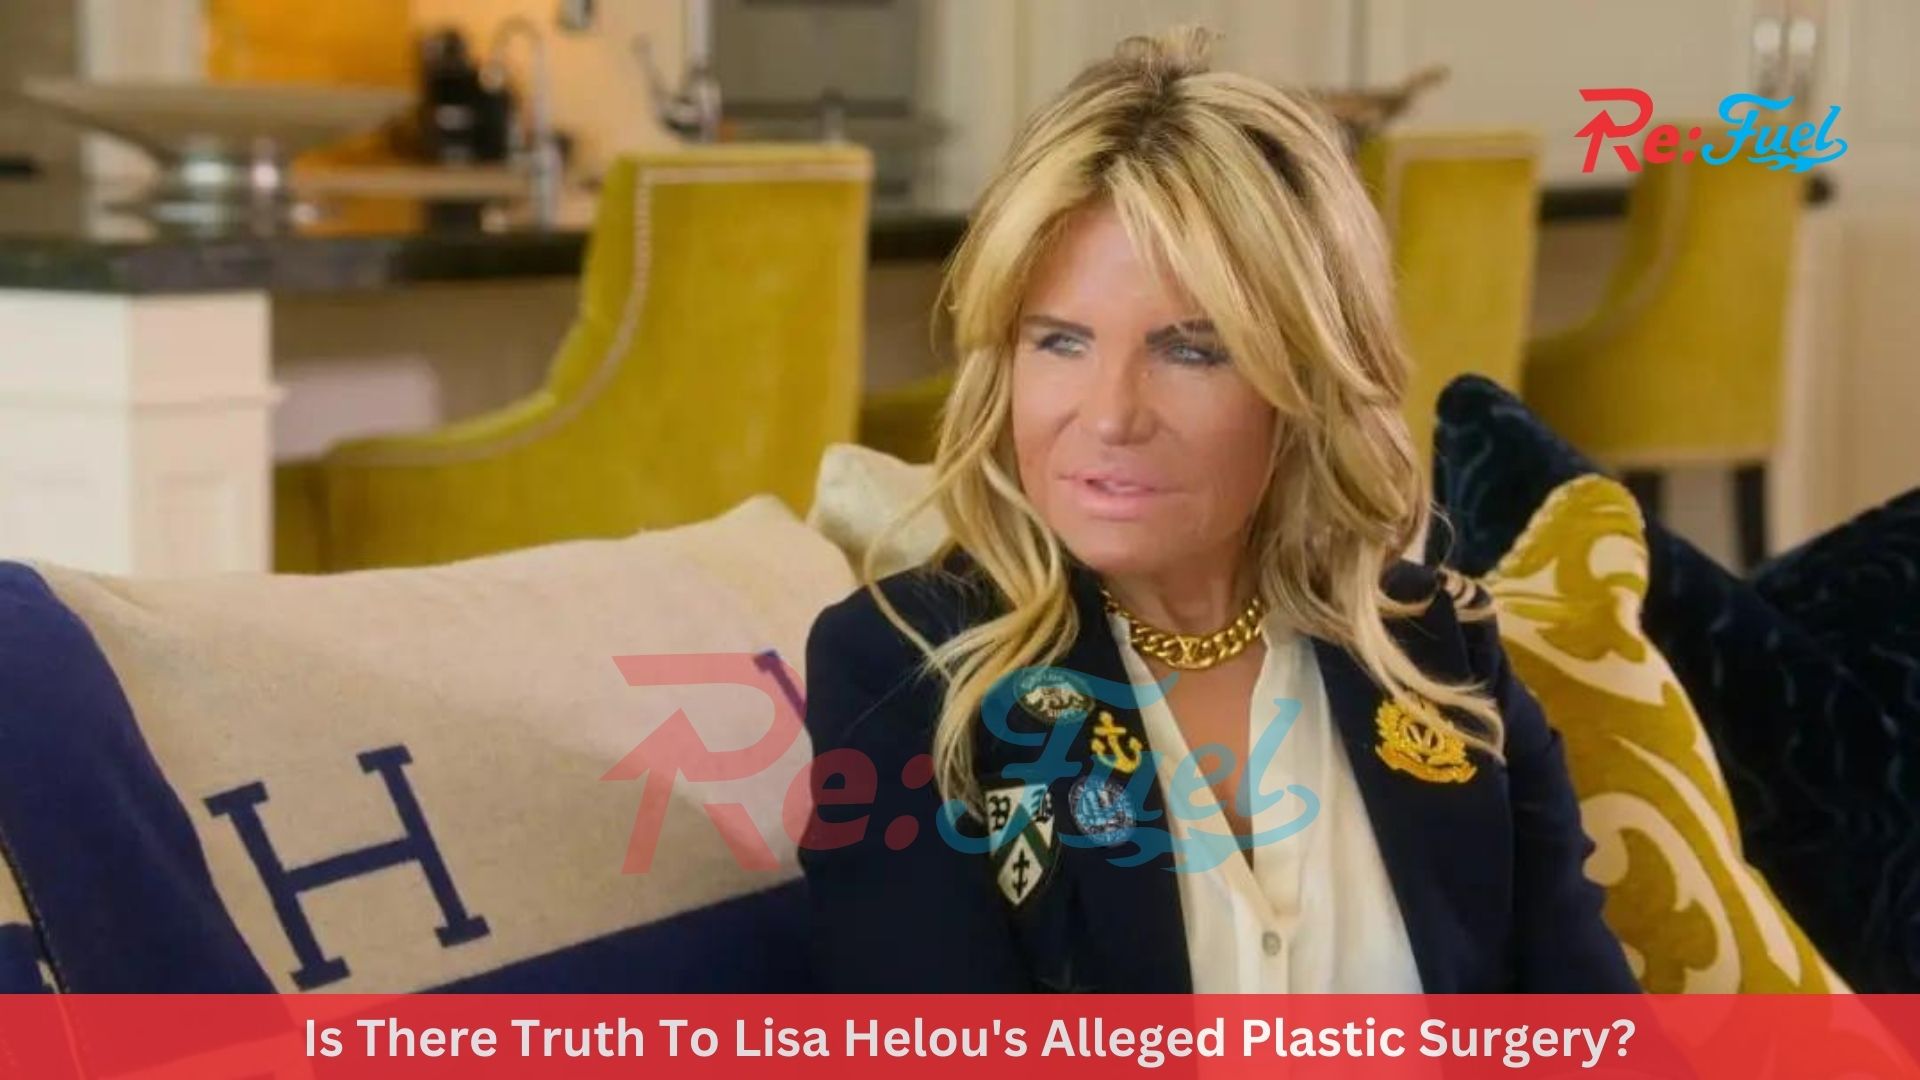 Is There Truth To Lisa Helou's Alleged Plastic Surgery?